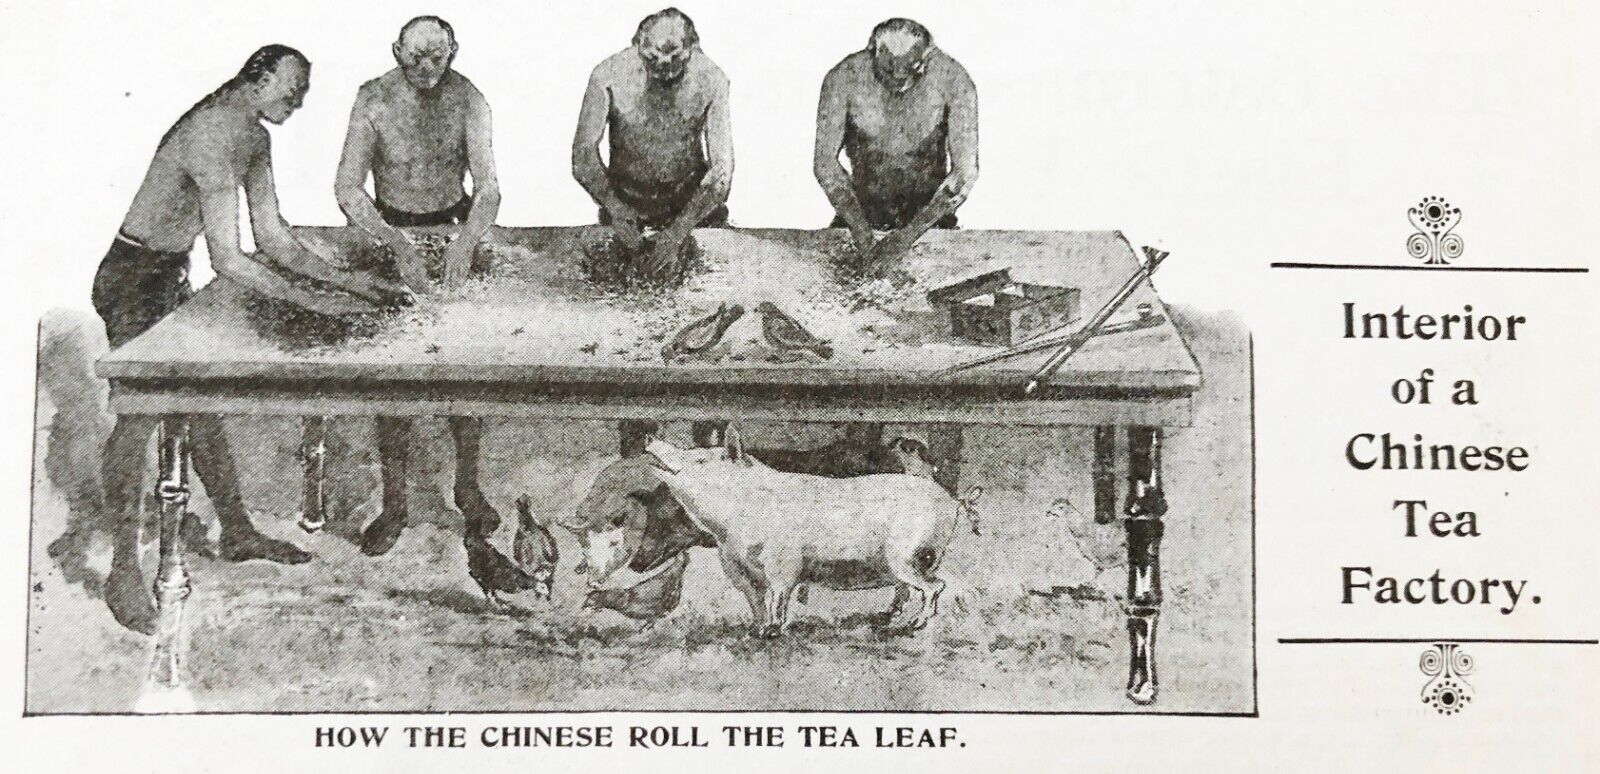 1897 CEYLON&INDIA TEA Vtg Print Ad~Old Chinese Factory Men Roll Leaves over Pig